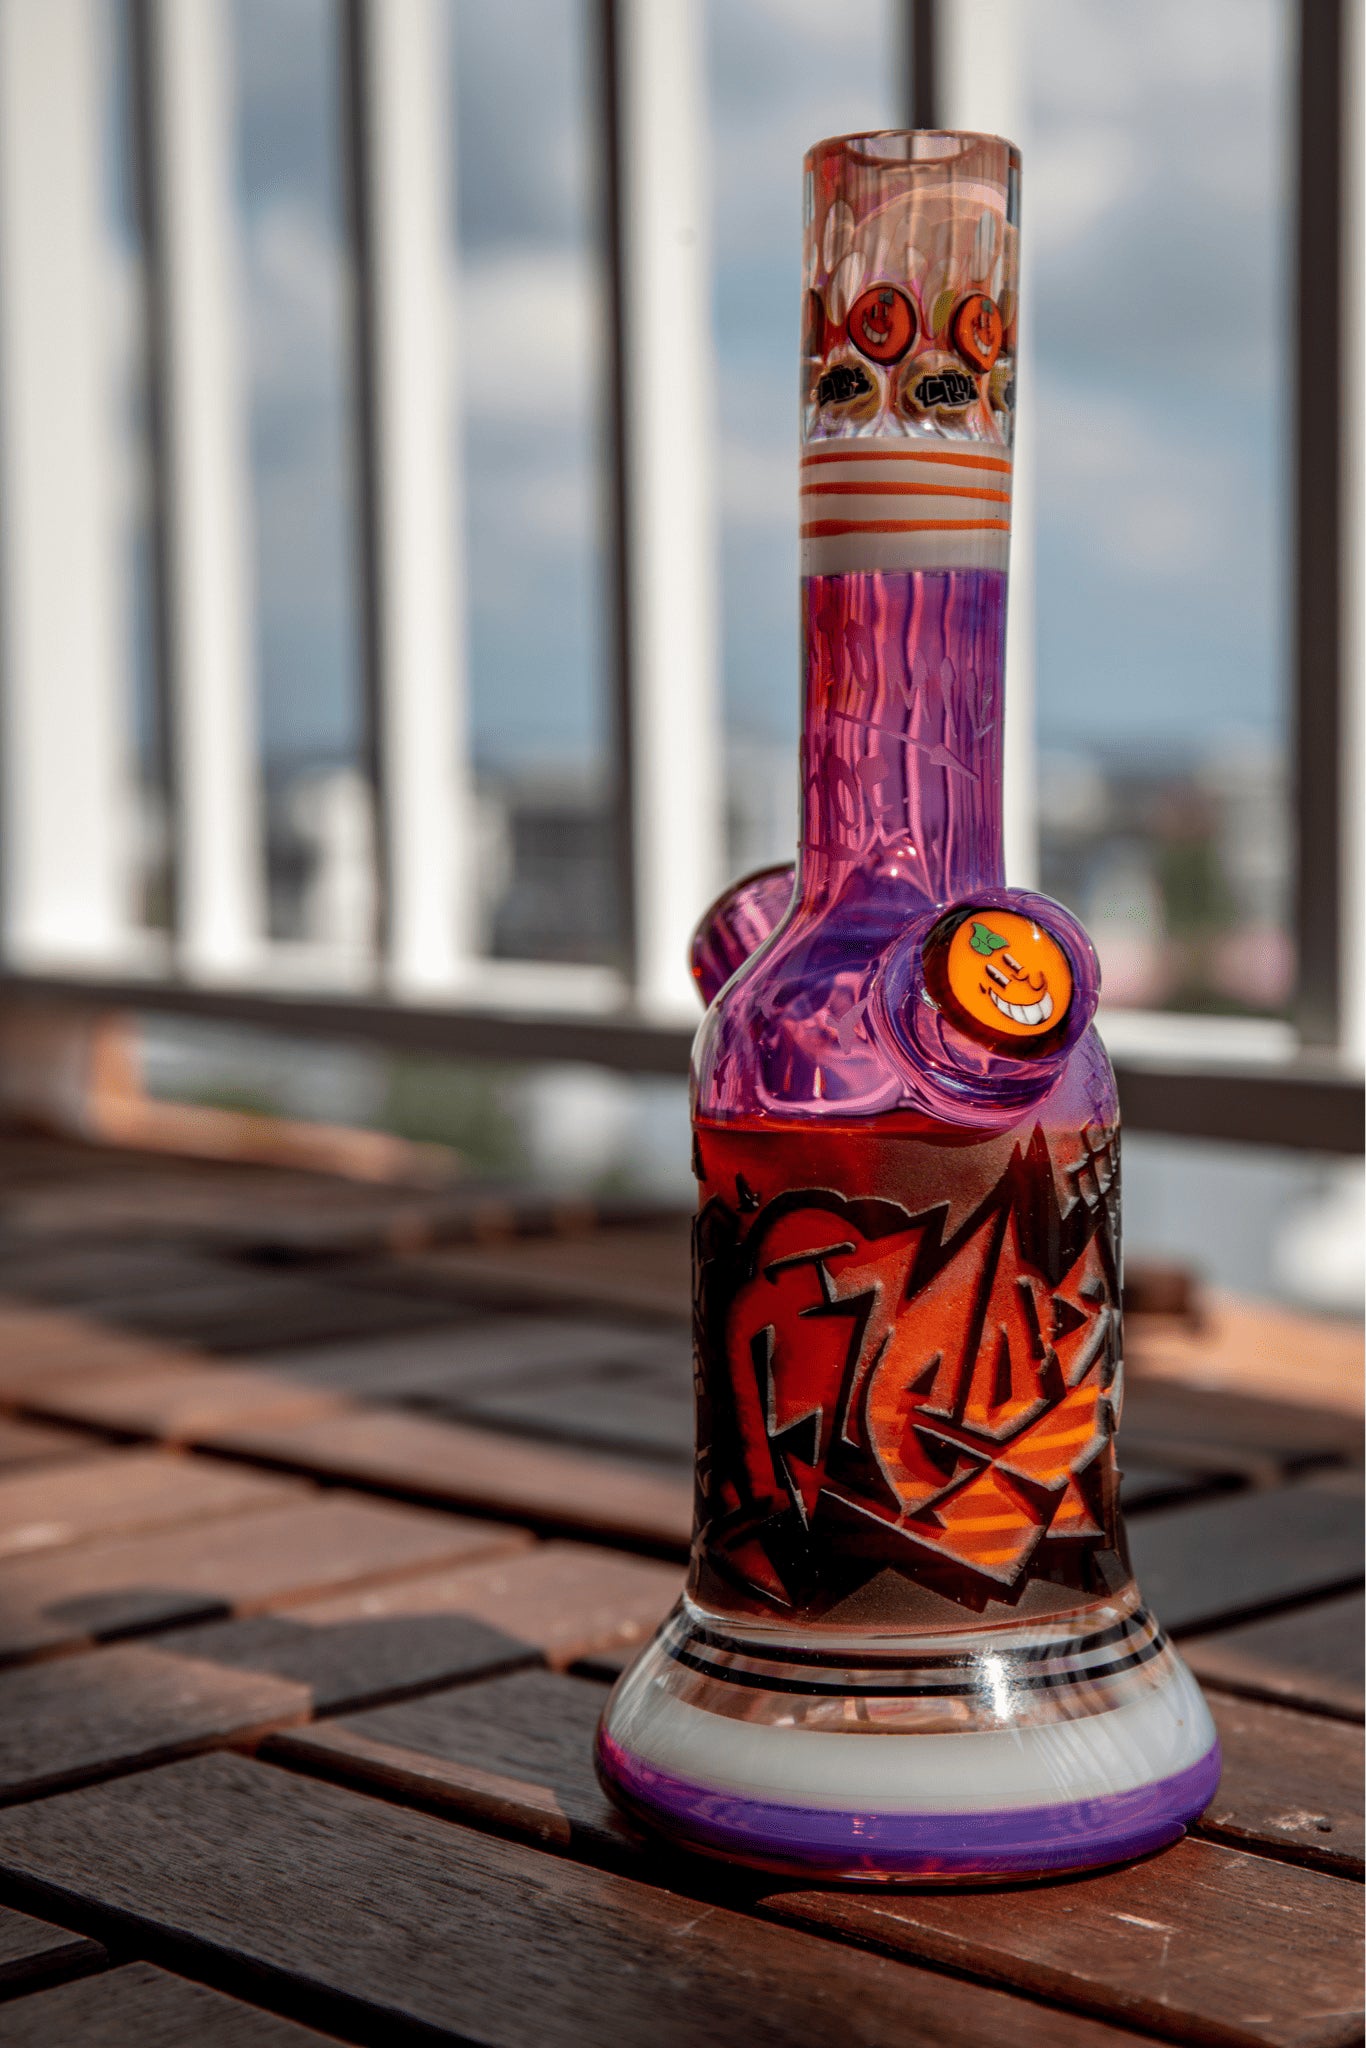 meticulously crafted art piece - Collab Purple Insano by GROE x Atomik (Got The Juice 2022)